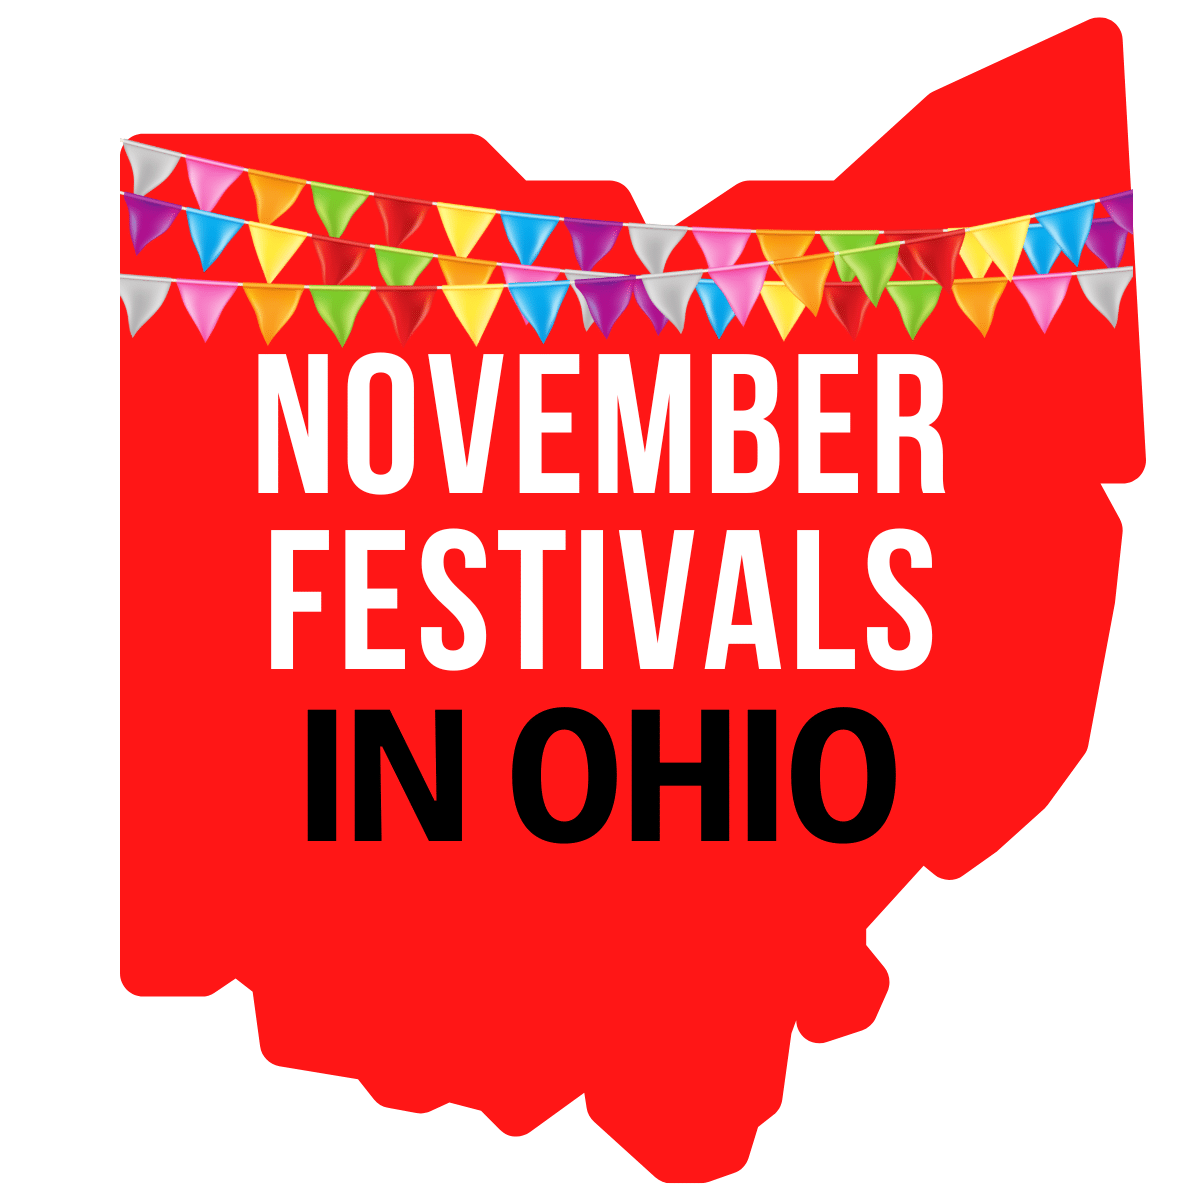 A square image of a red print of Ohio with colorful flags strung across it. It has text November Festivals in Ohio in white and black letters.